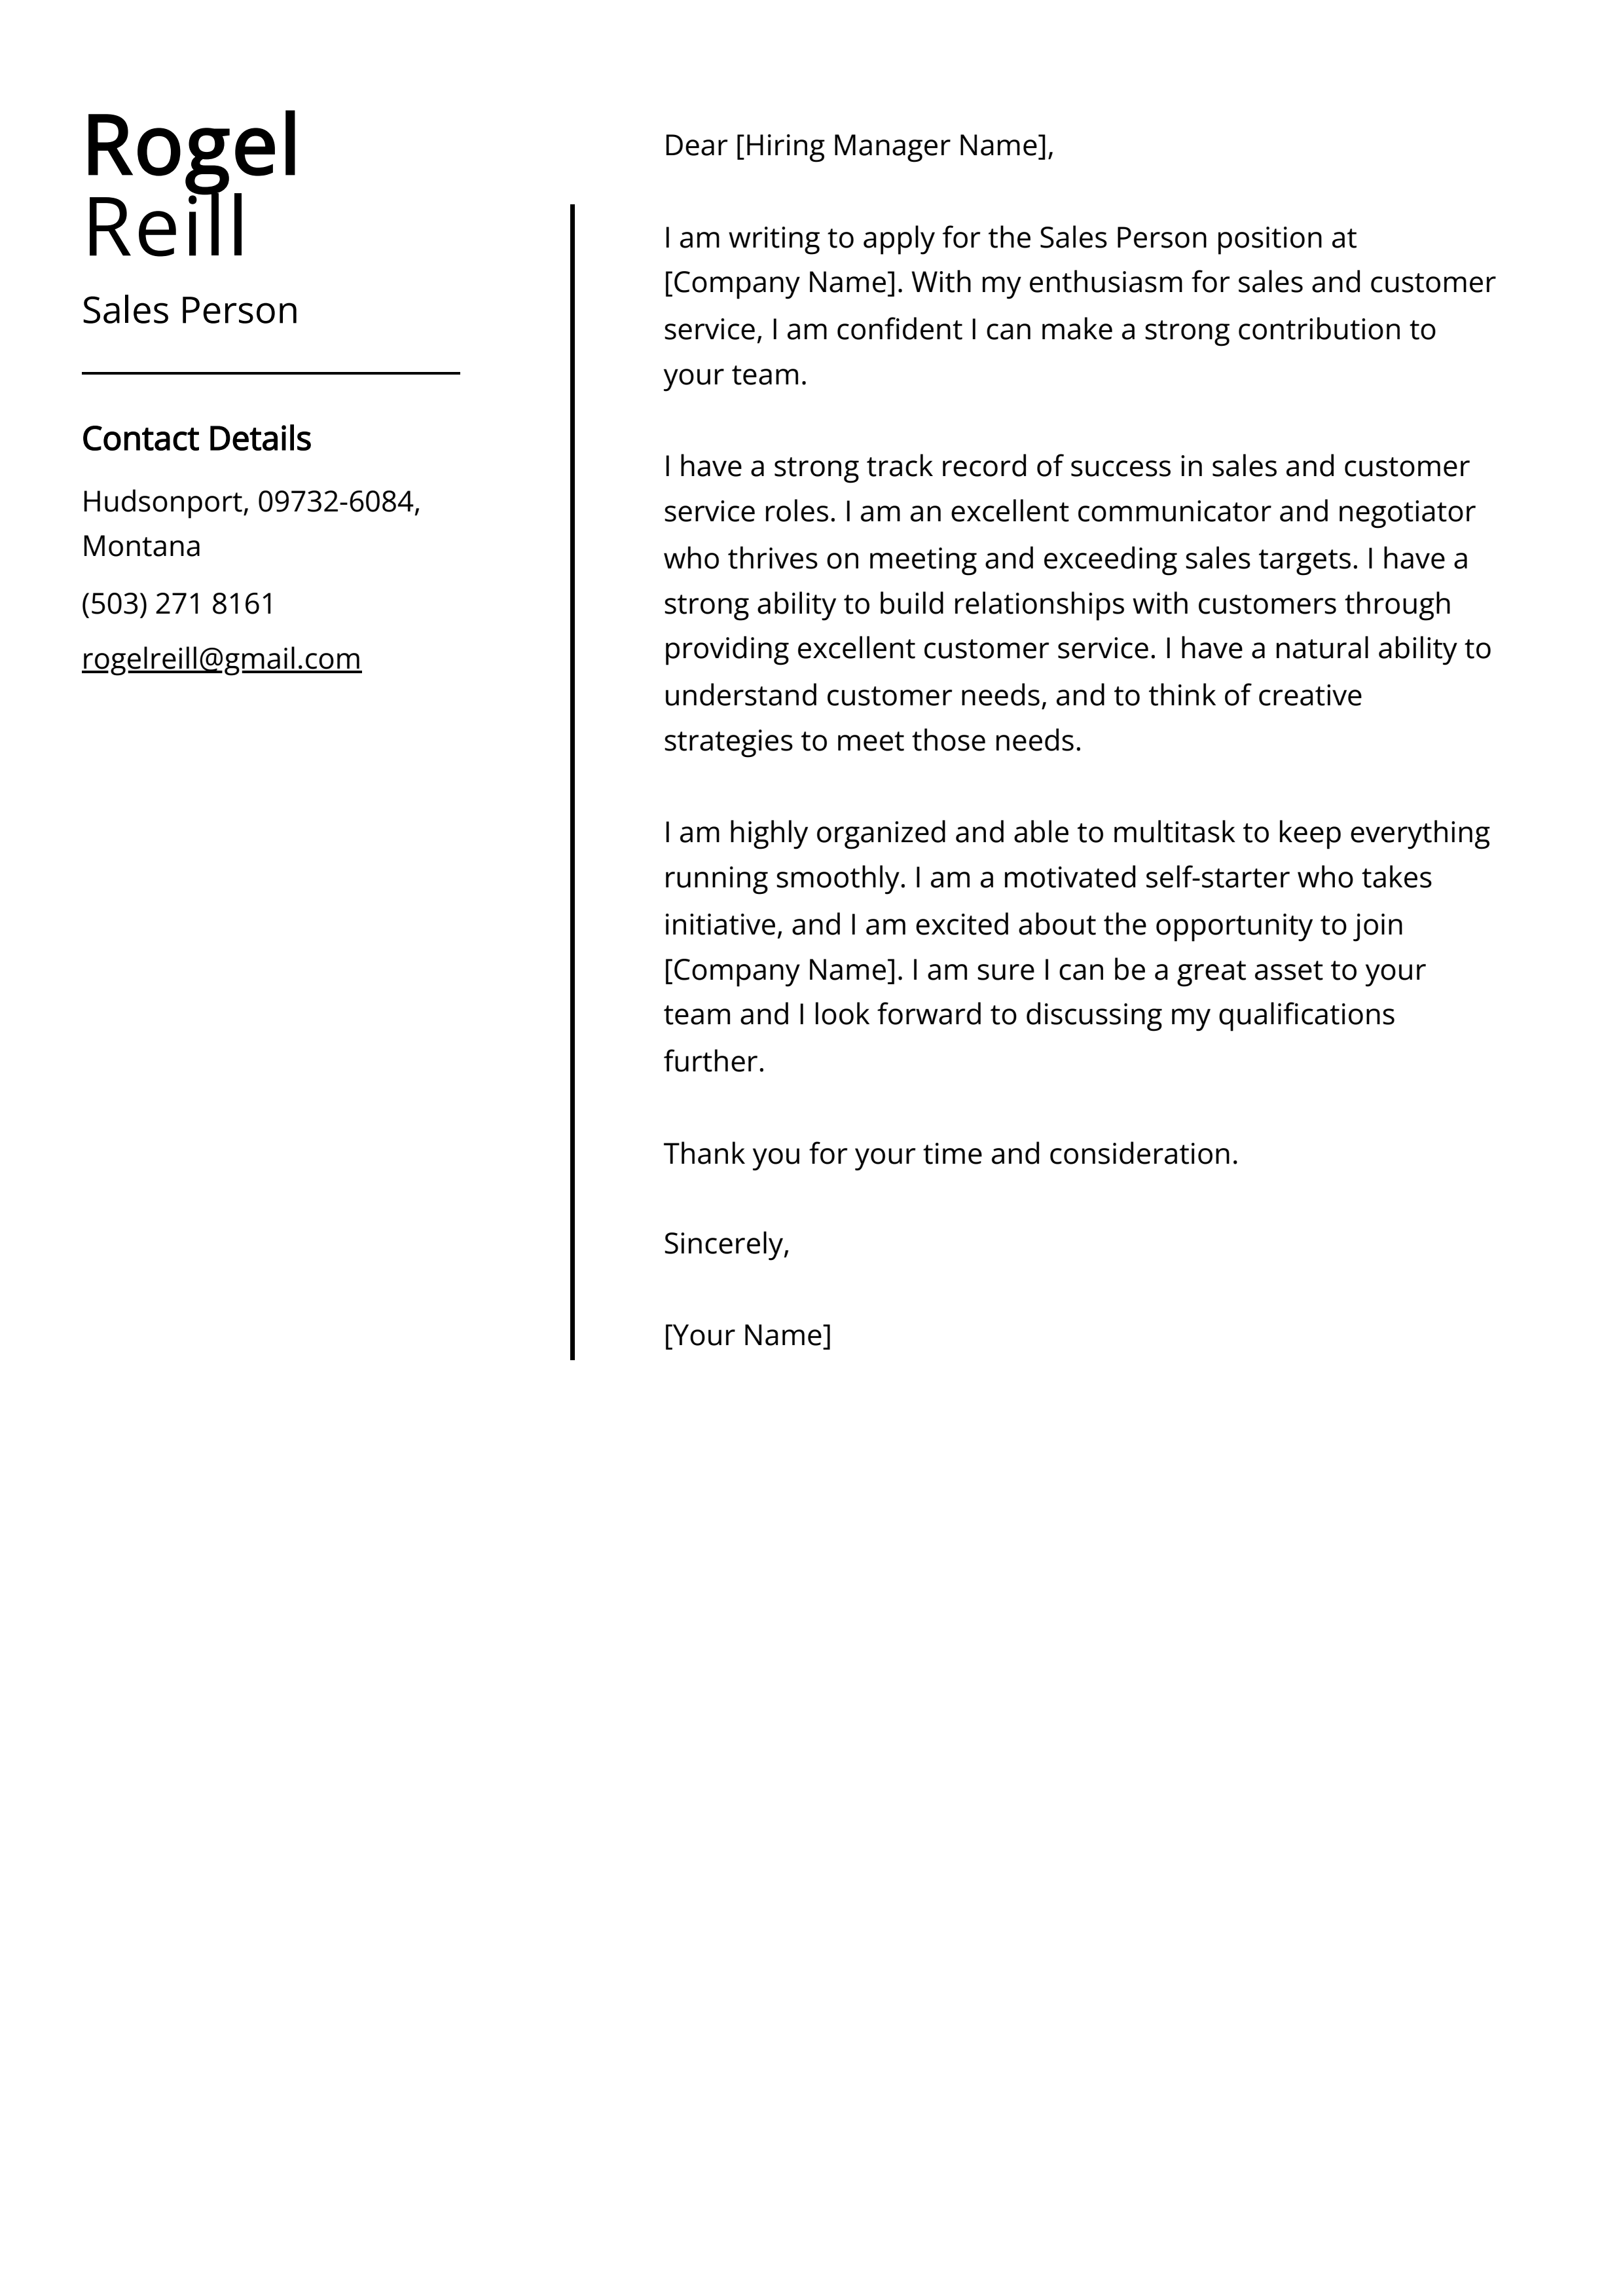 Sales Person Cover Letter Example